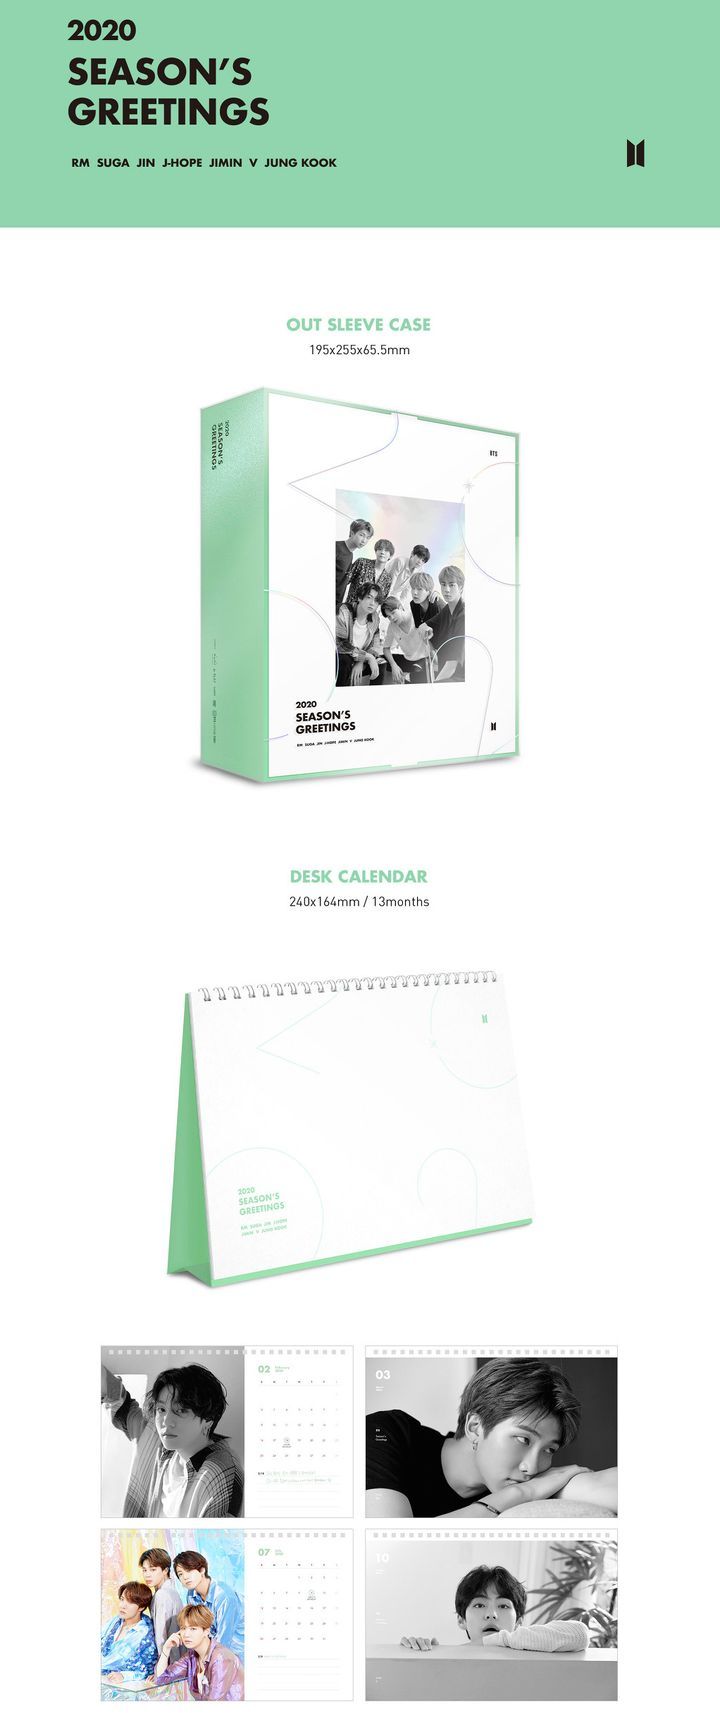 YESASIA: Recommended Items - BTS 2020 Season's Greetings DVD 